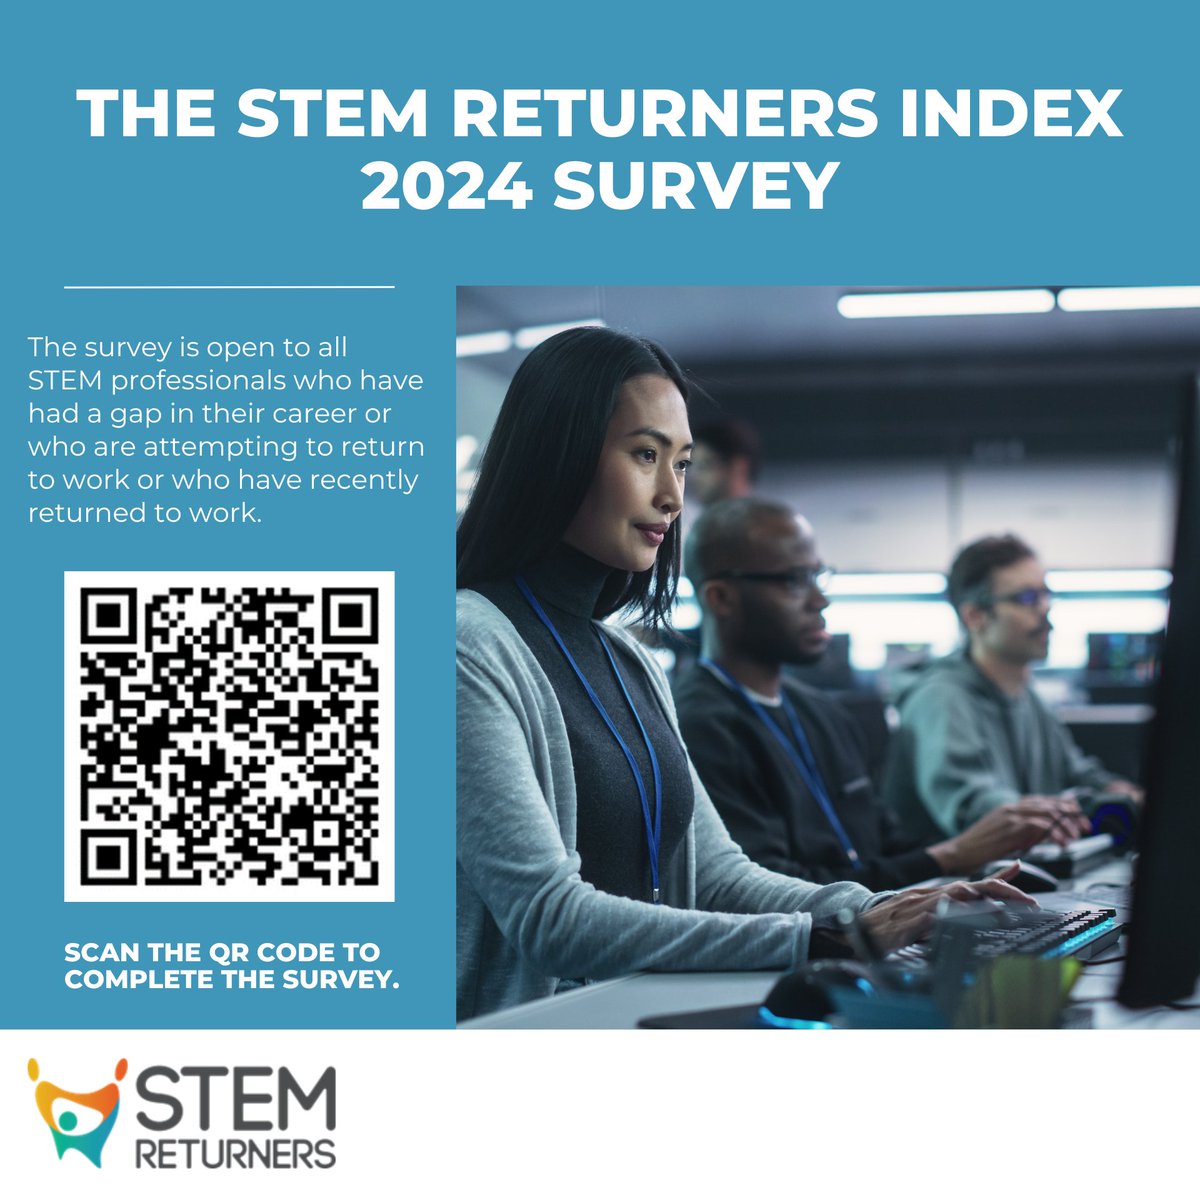 We invite all #STEM professionals who have had a career break or are looking to re-enter their industry, to share their experiences with us. We NEED your valuable input to drive change and create a more #inclusive industry. To complete the survey, visit online1.snapsurveys.com/interview/77a2…